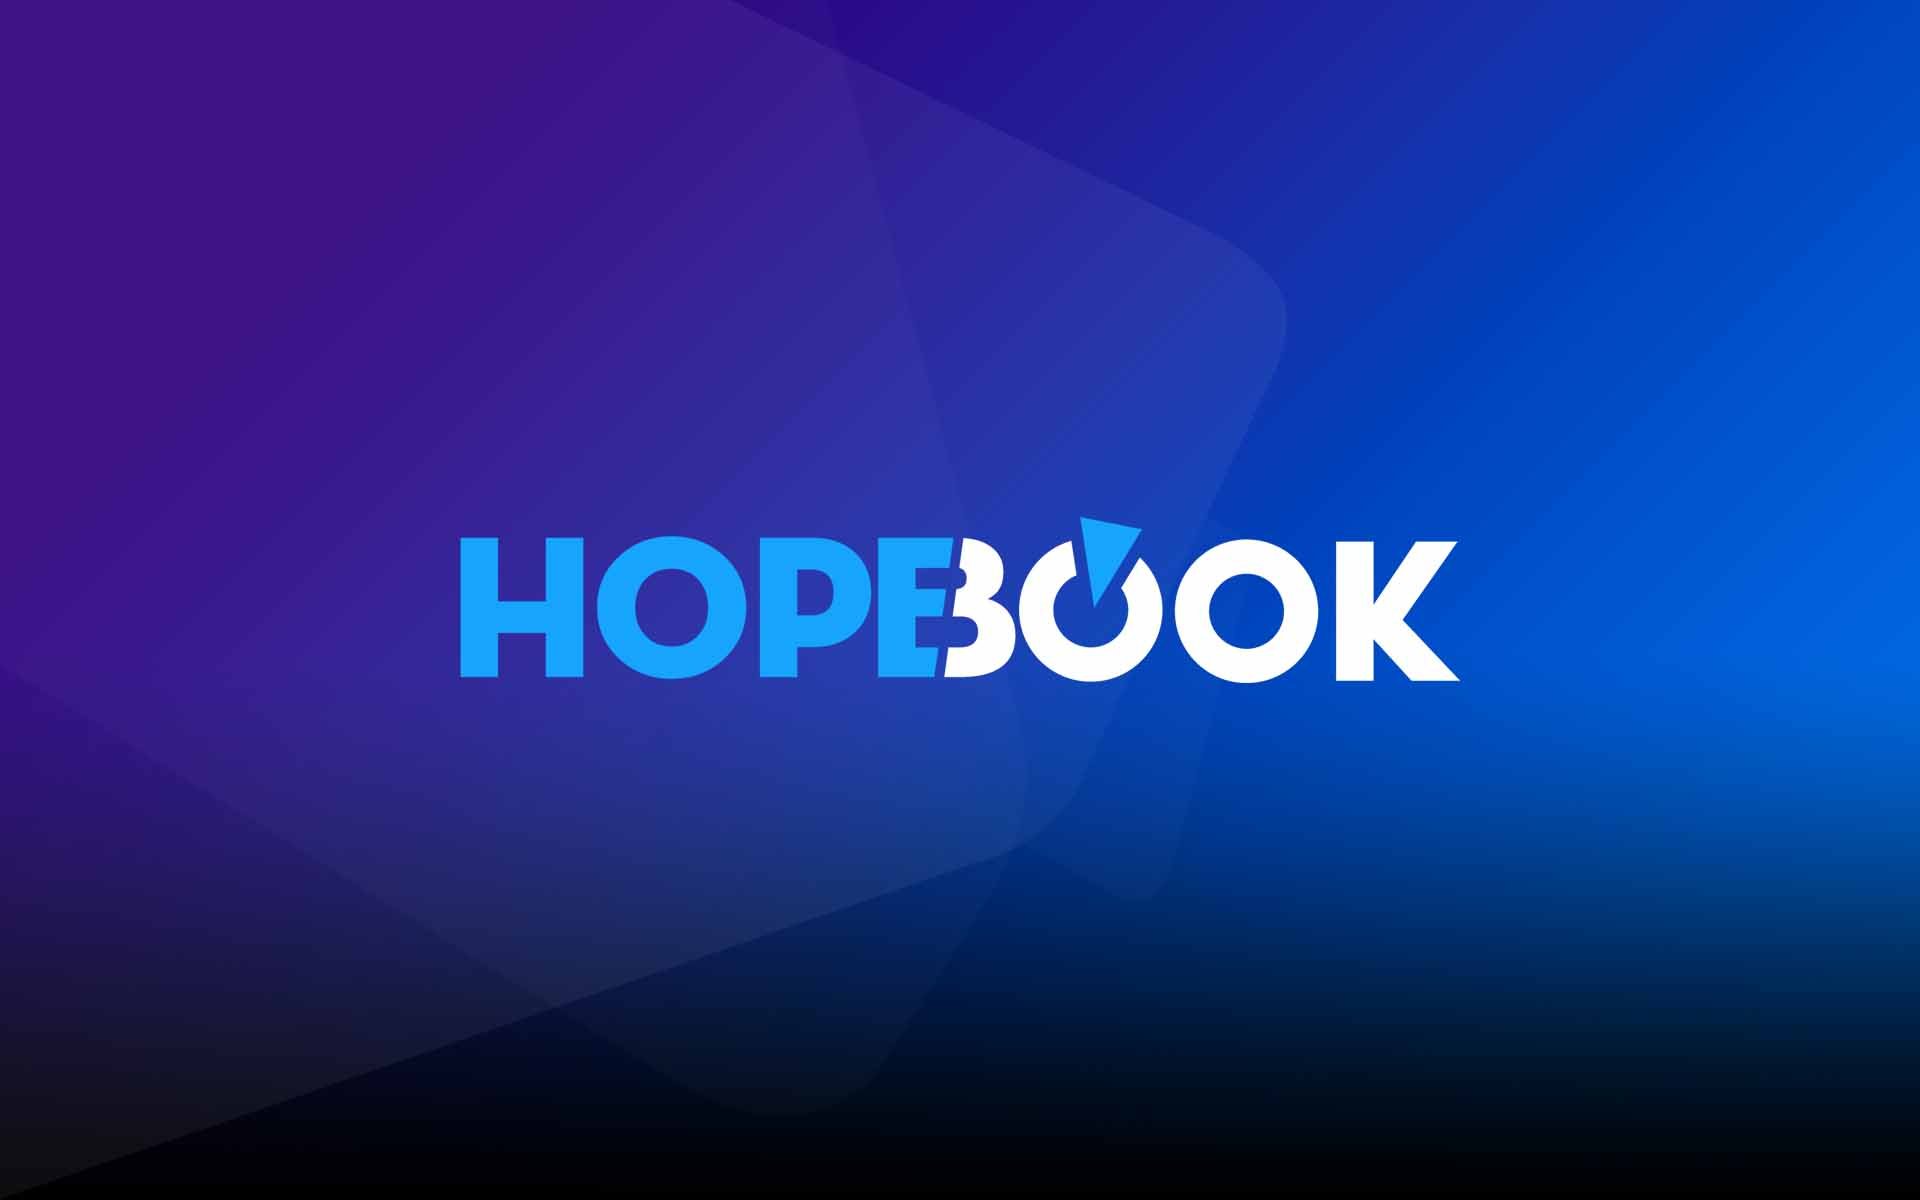 HOPEBOOK Readies For Launch Event – Will Forever Change The Way People Around The World Approach Banking & Finance - The World's Most Transparent Financial Rotation System